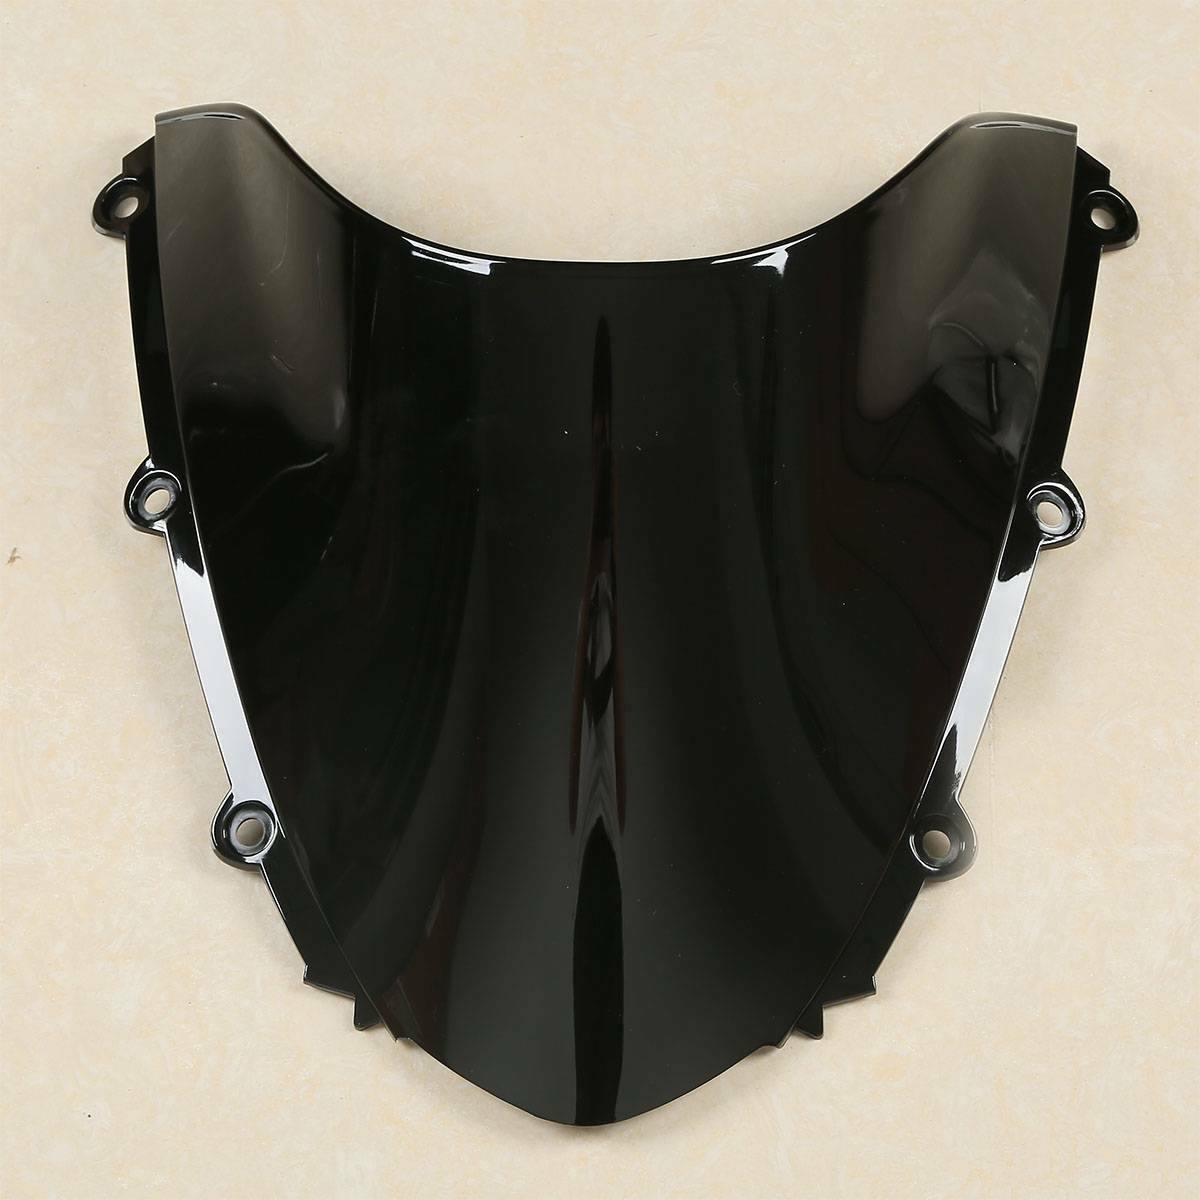 Windshield Windscreen Fit For Honda CBR1000RR 2004-2007 Black 04 2005 2006 2007 - Moto Life Products